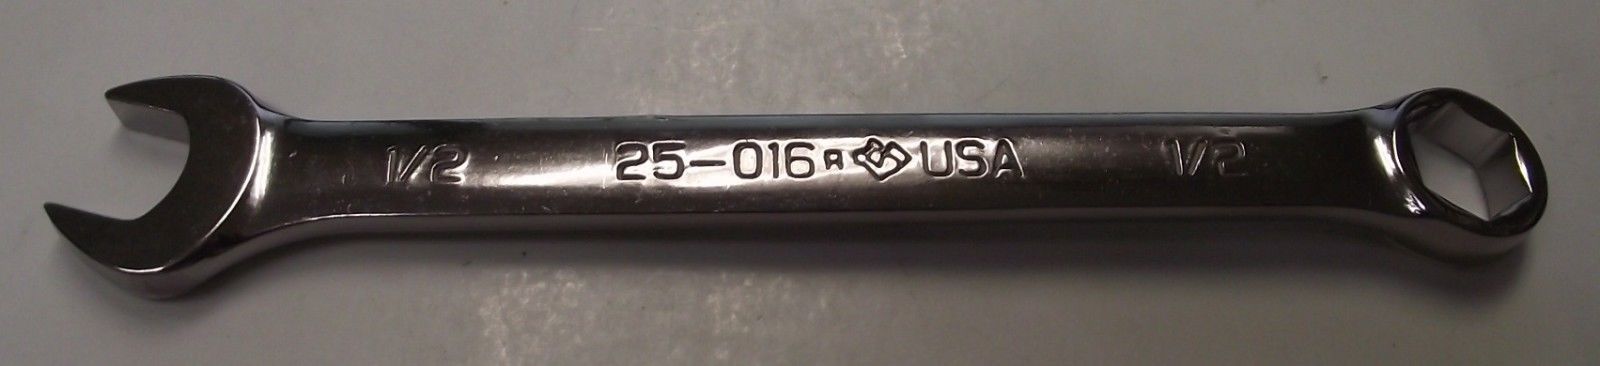 Armstrong 25-016 1/2" 6pt Combination Wrench USA